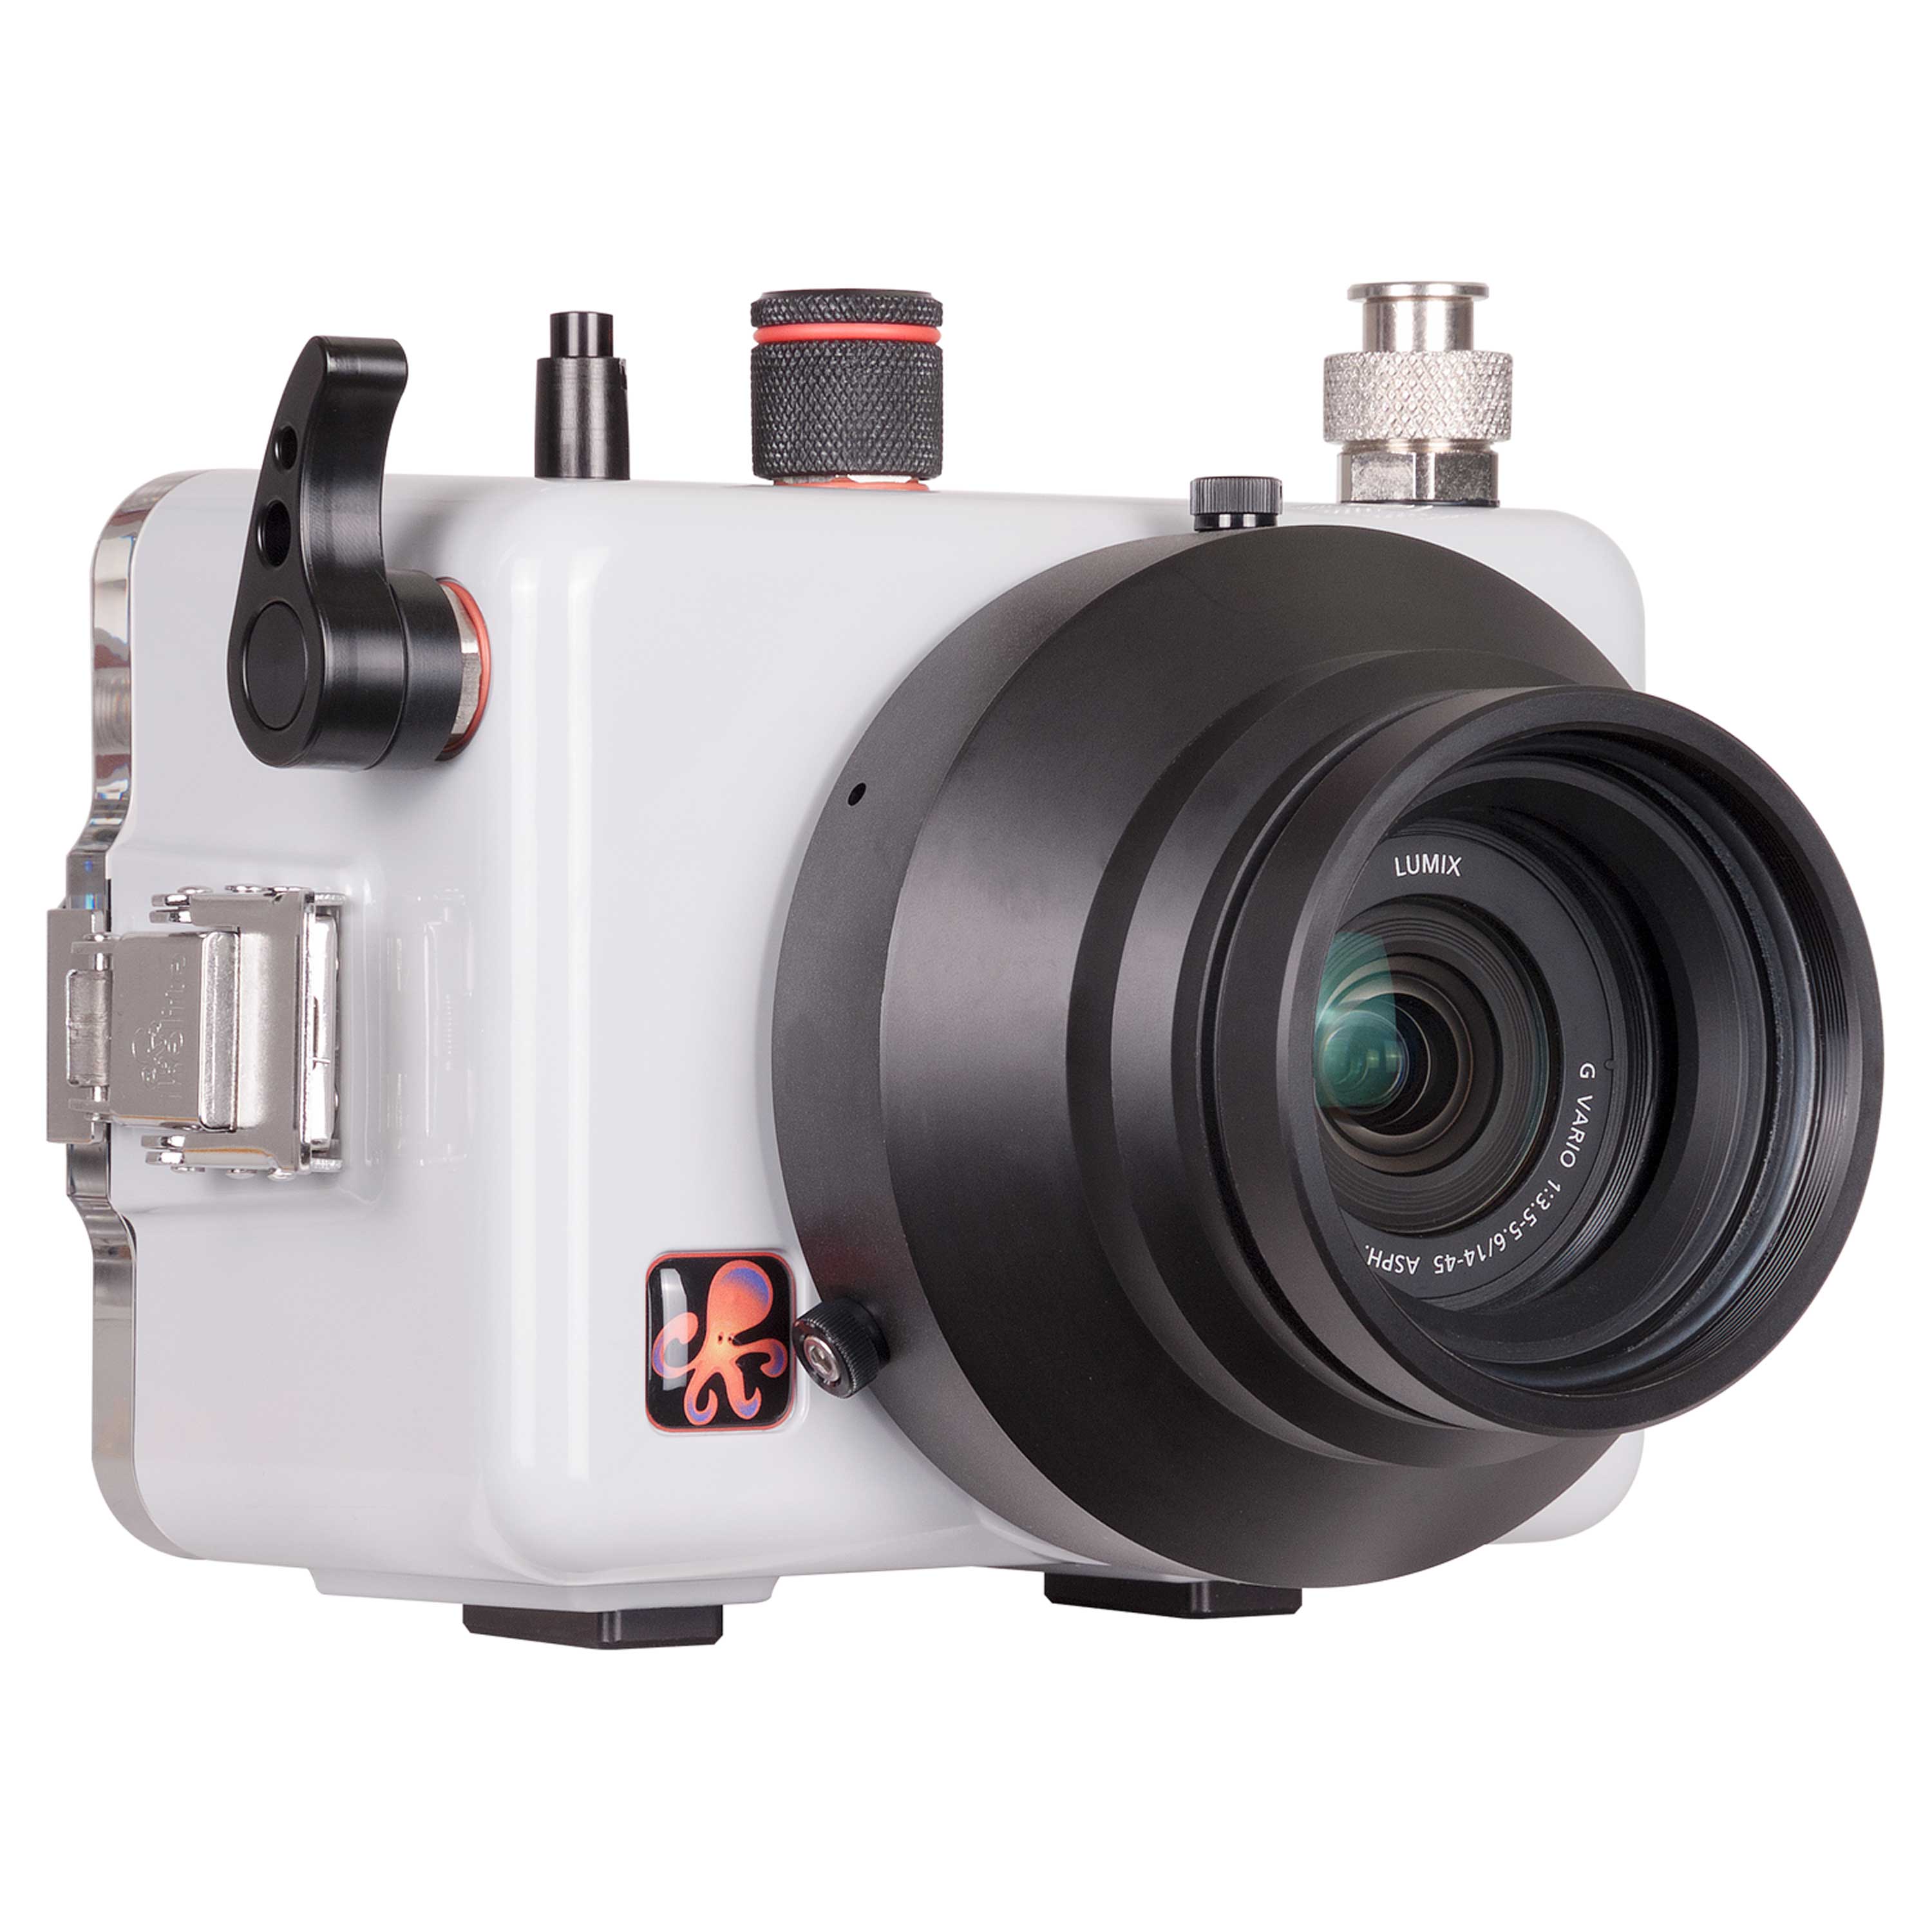 200DLM/A Underwater Housing for Olympus PEN E-PL8 Mirrorless Micro Four-Thirds Digital Camera